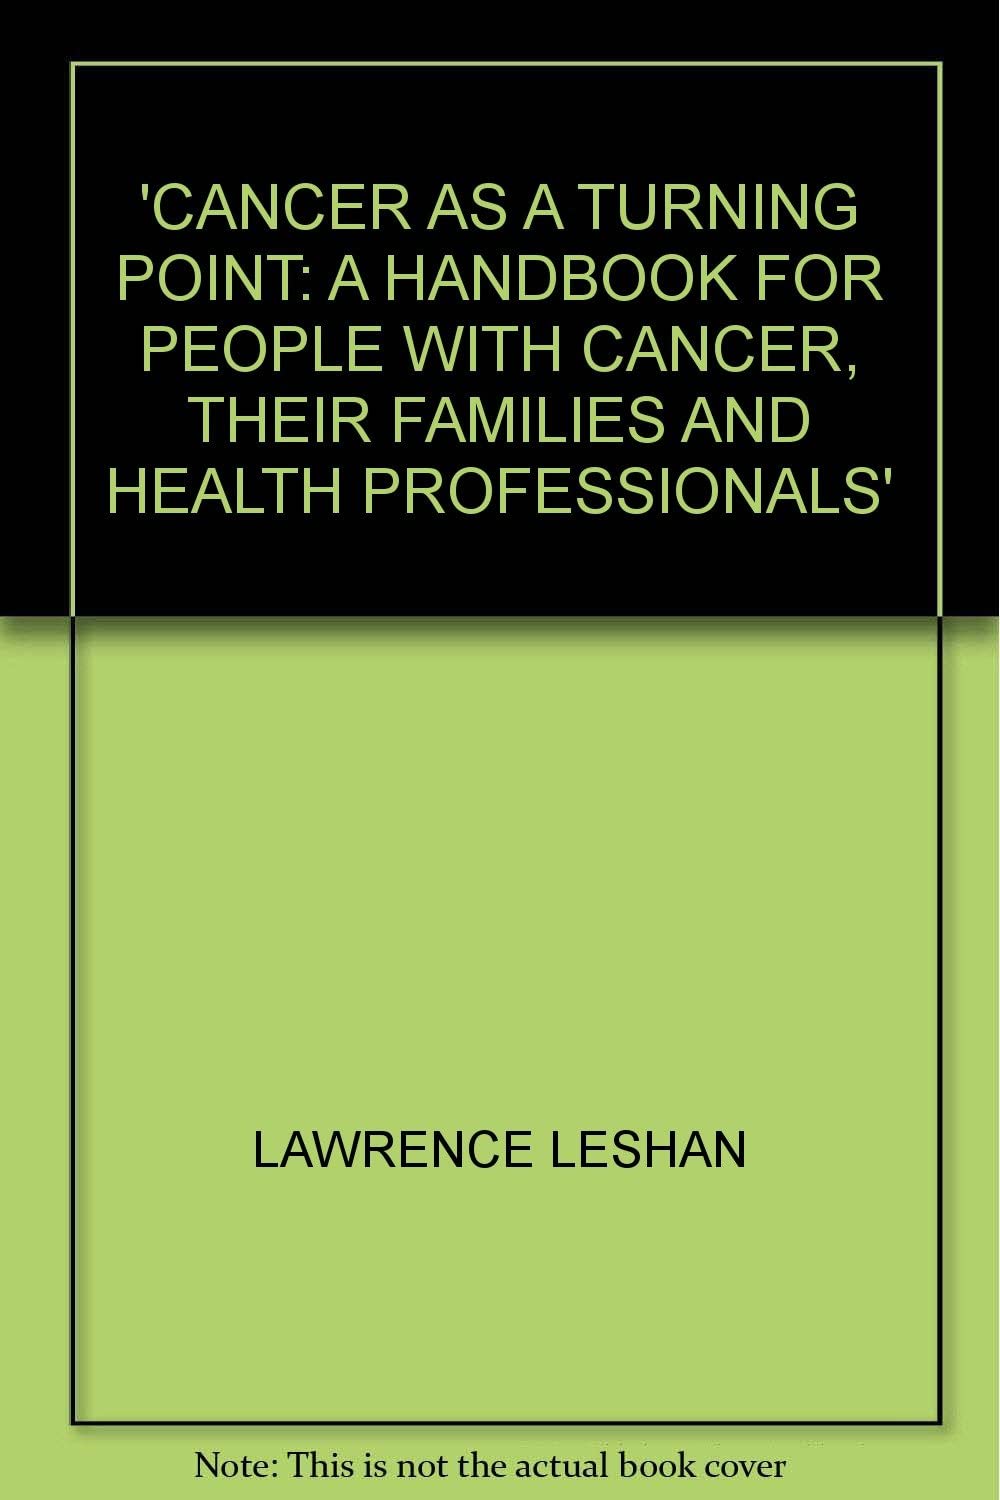 CANCER AS A TURNING POINT: A HANDBOOK FOR PEOPLE WITH CANCER, THEIR FAMILIES AND HEALTH PROFESSIONALS'